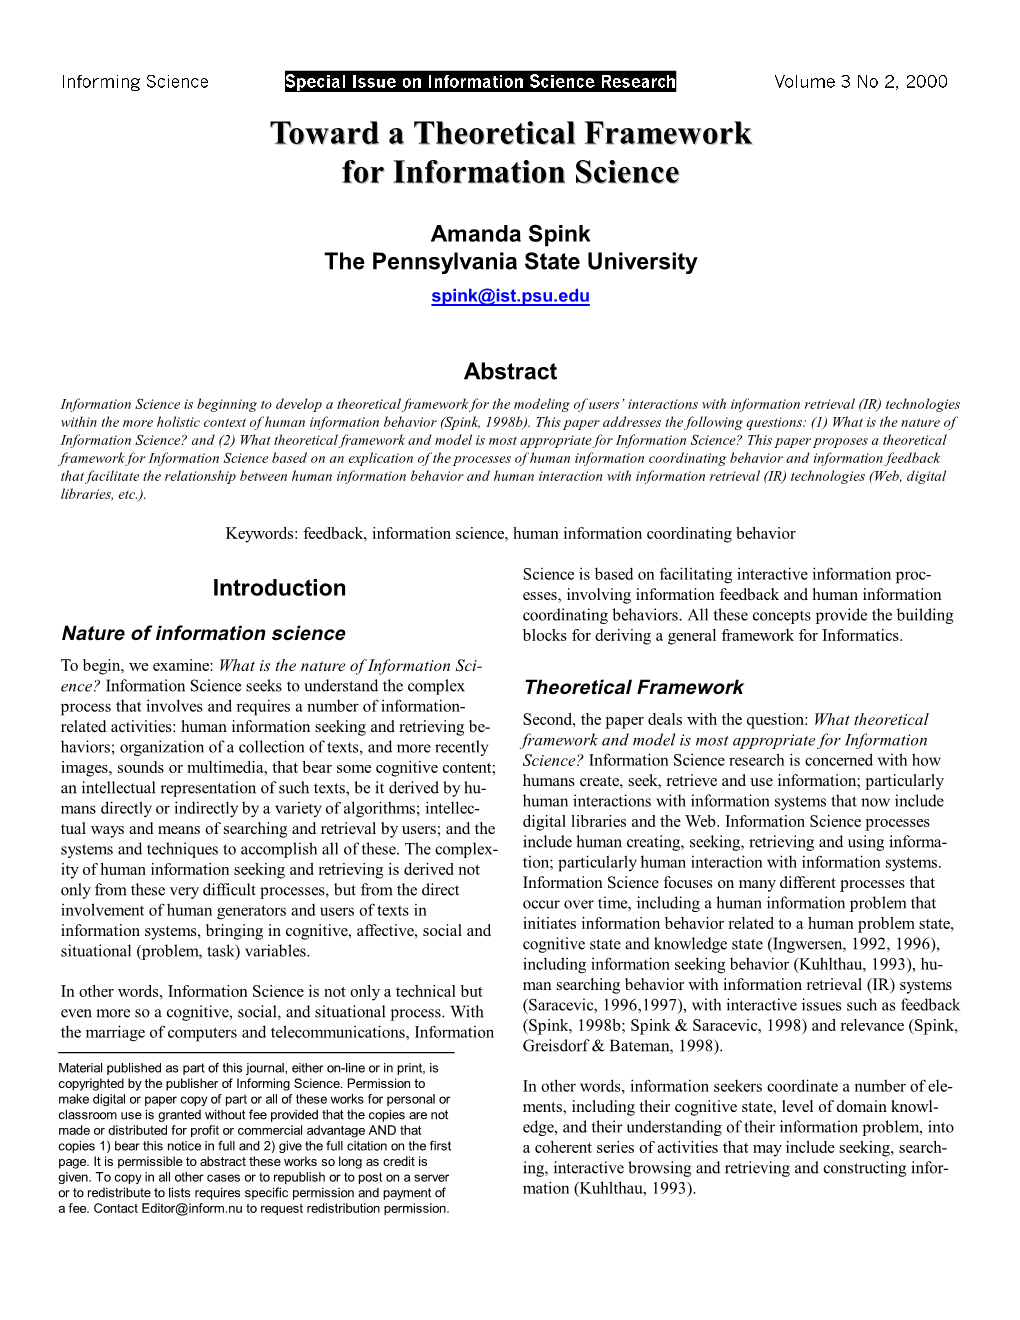 Toward a Theoretical Framework for Information Science